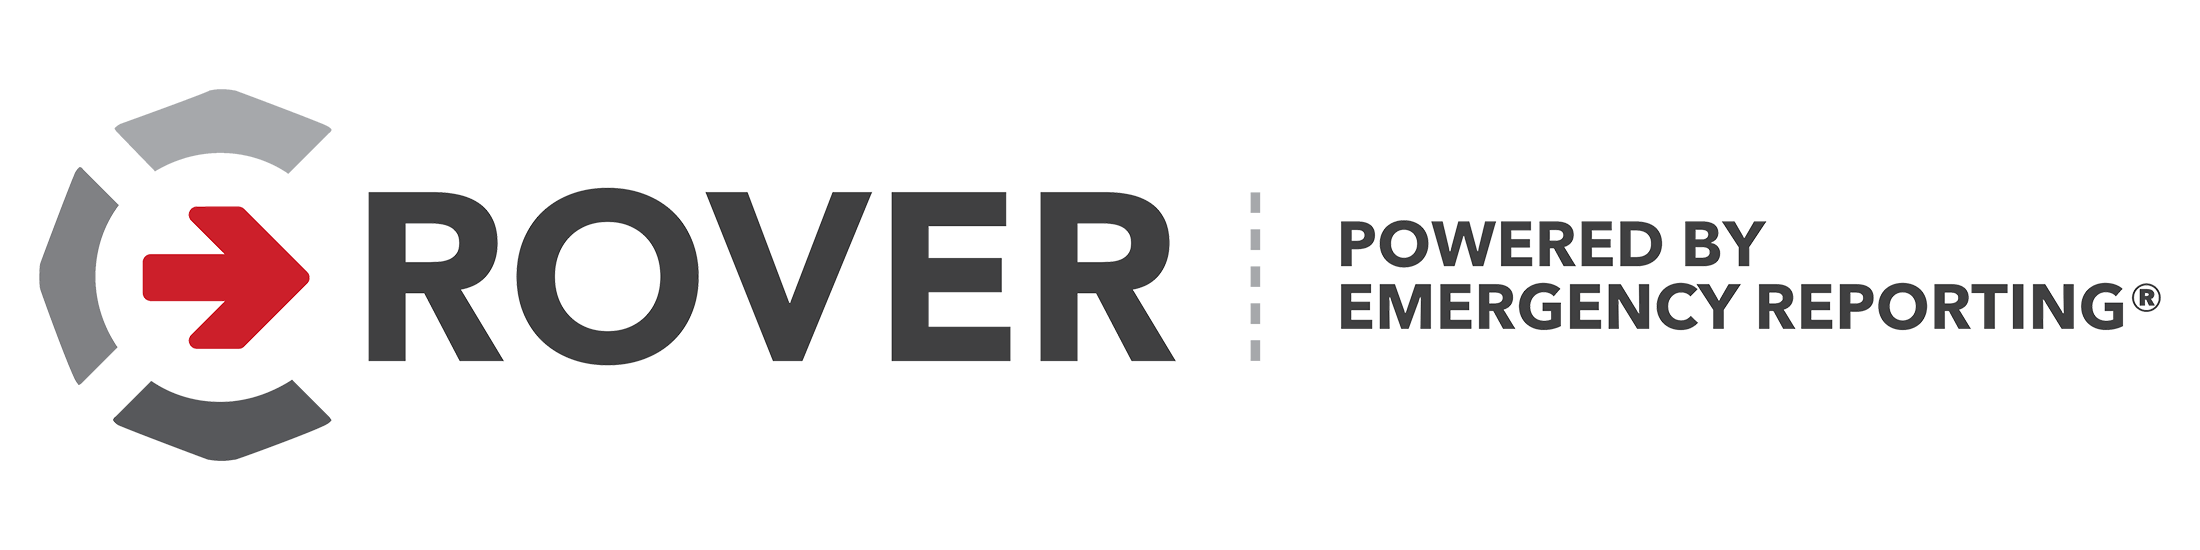 Rover Powered By Emergency Reporting Logo